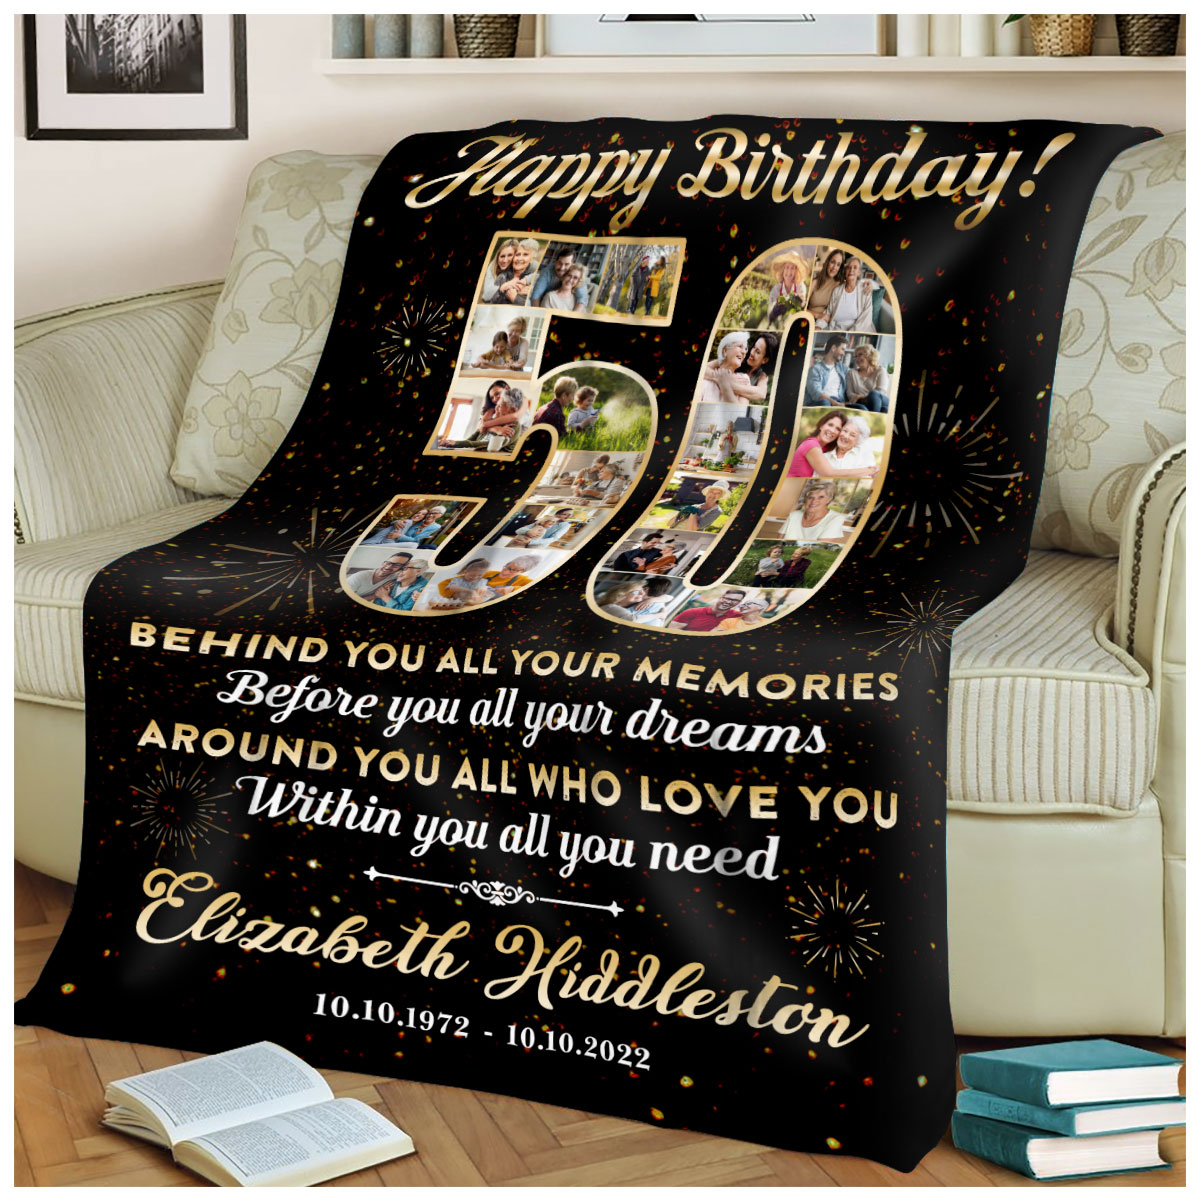 50th Birthday Gifts For Women Blanket 50 X 60, Happy 50th